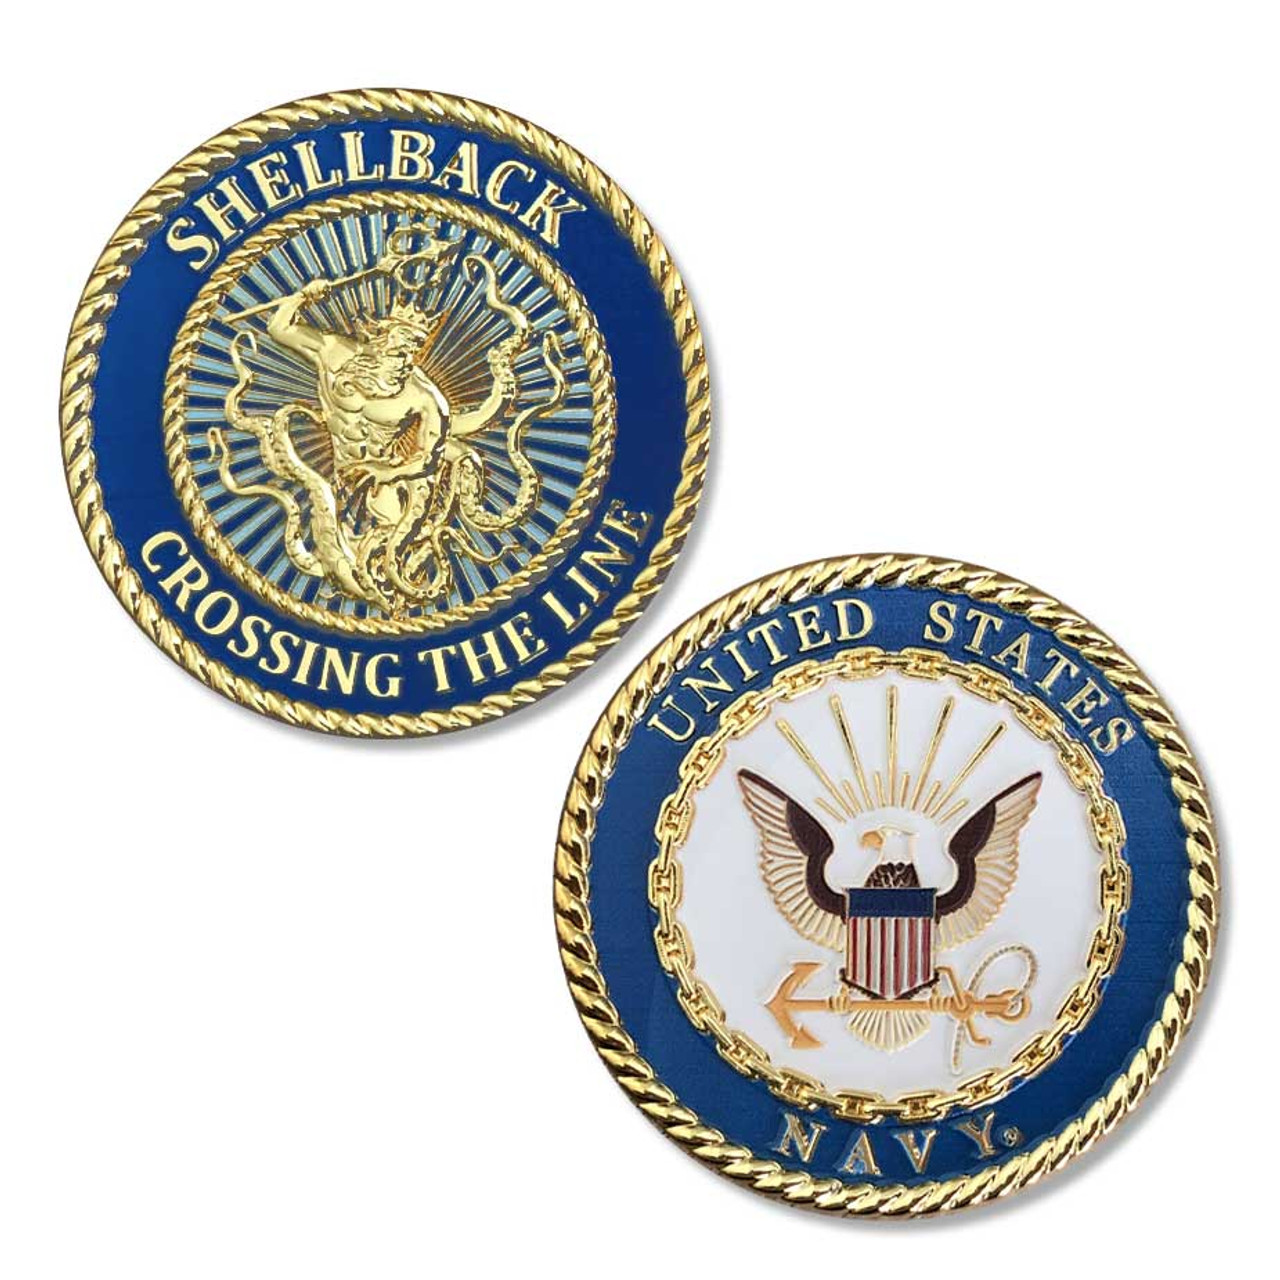 US Navy Challenge Coin with Shellback Graphic